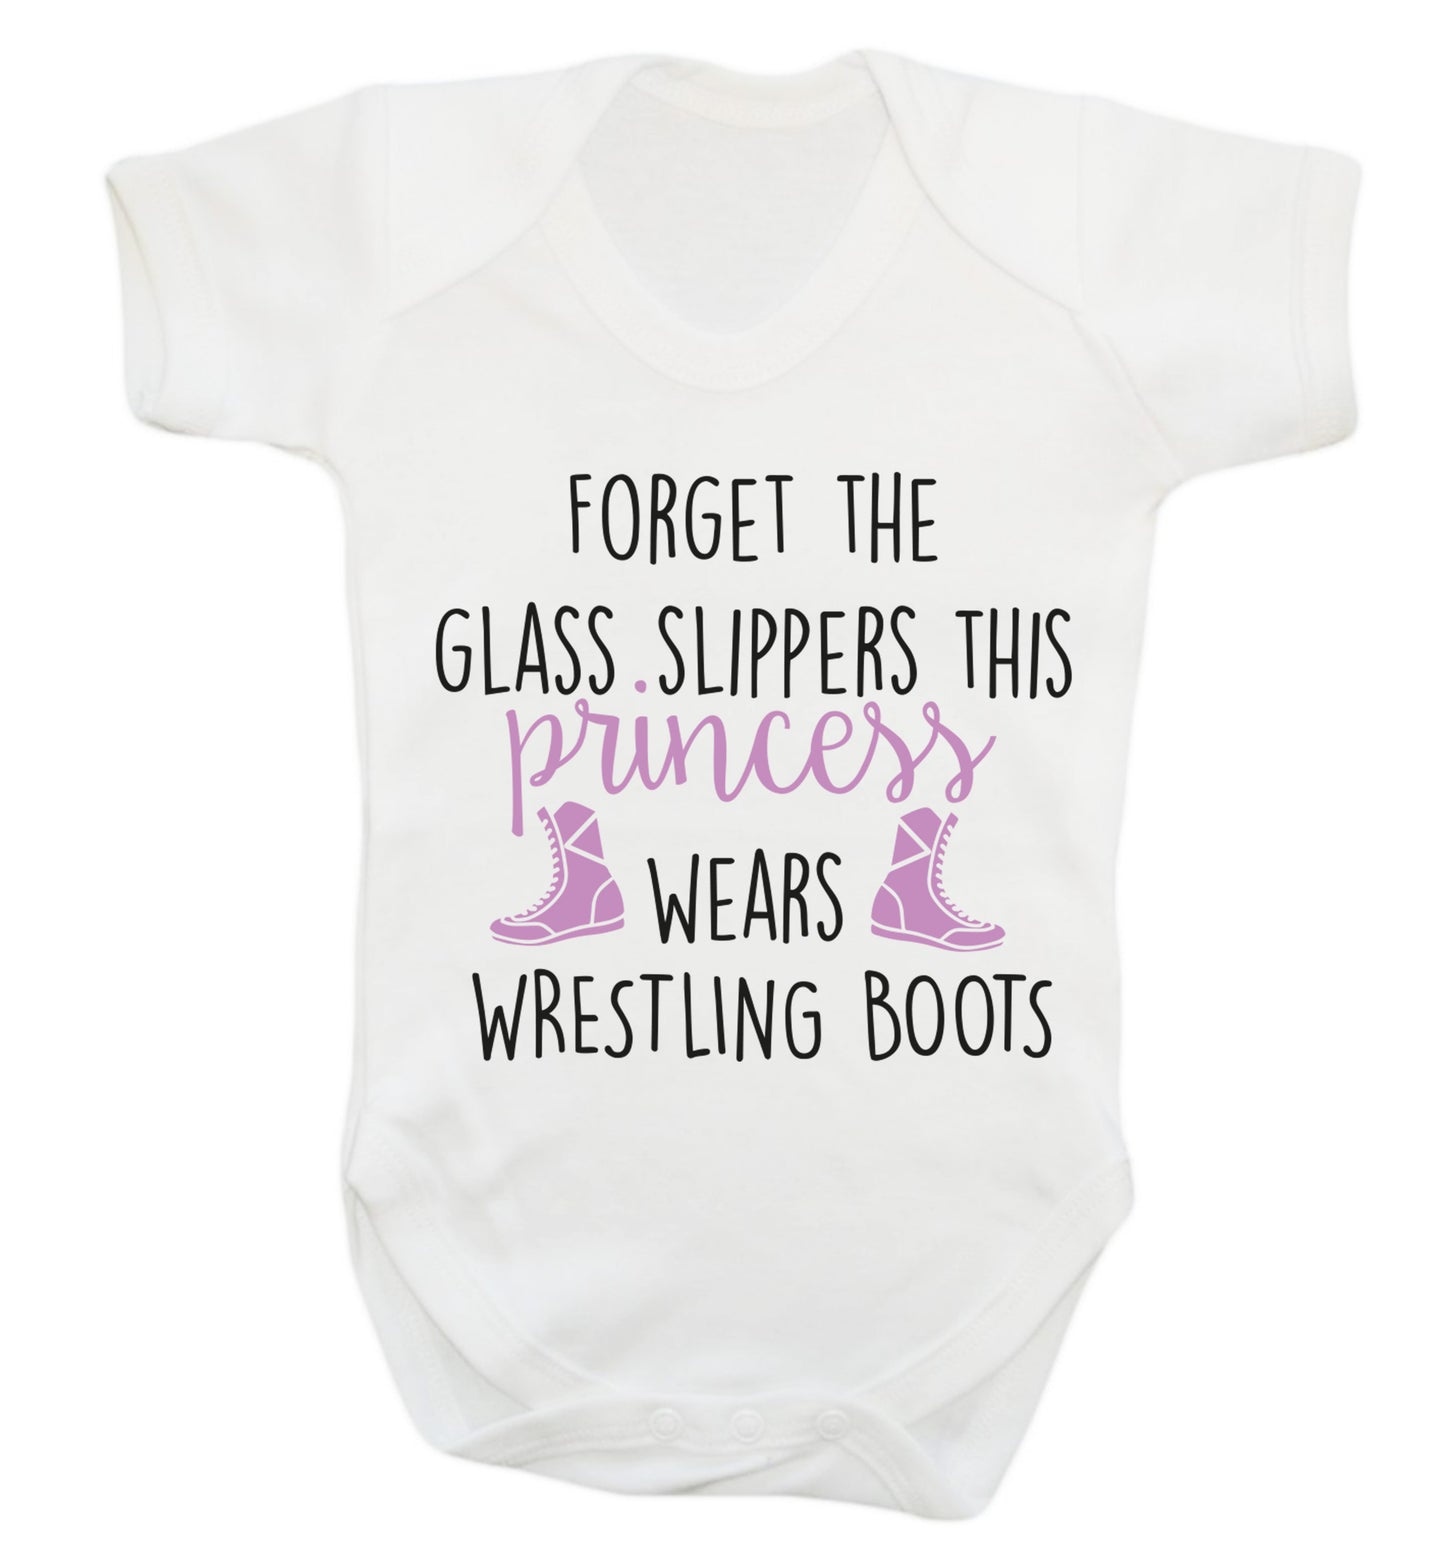 Forget the glass slippers this princess wears wrestling boots Baby Vest white 18-24 months